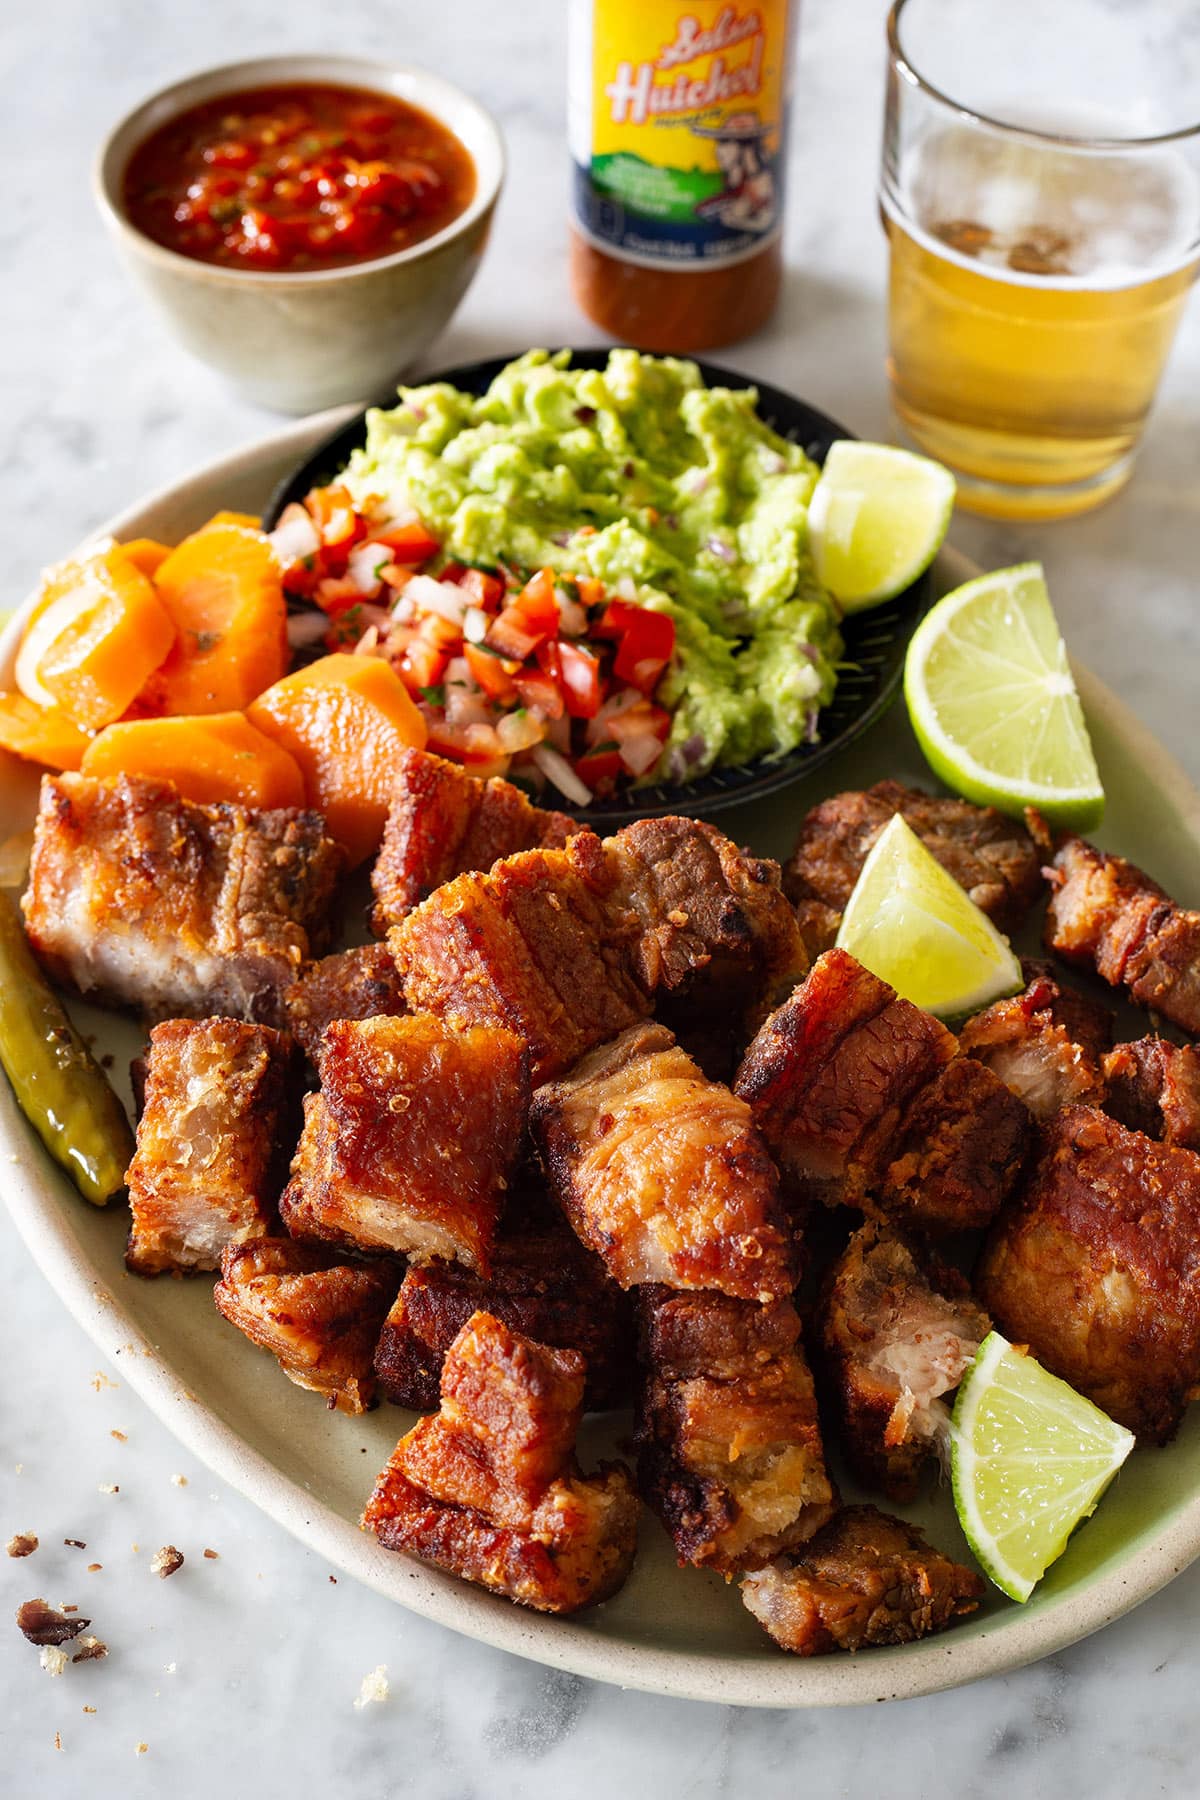 Mexican chicharrones in a platter with lime wedges, guacamole, pico de gallo, and pickled carrots. Behind a bowl with salsa, a bottle of hot sauce, and beer in a glass.